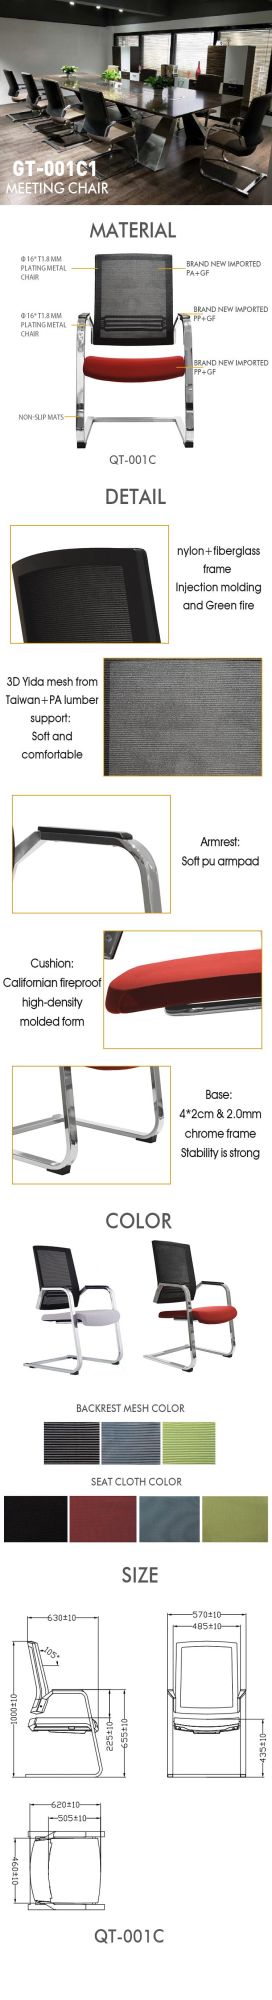 with Armrest Modern Huy Stand Export Packing Mesh Office Conference Chair